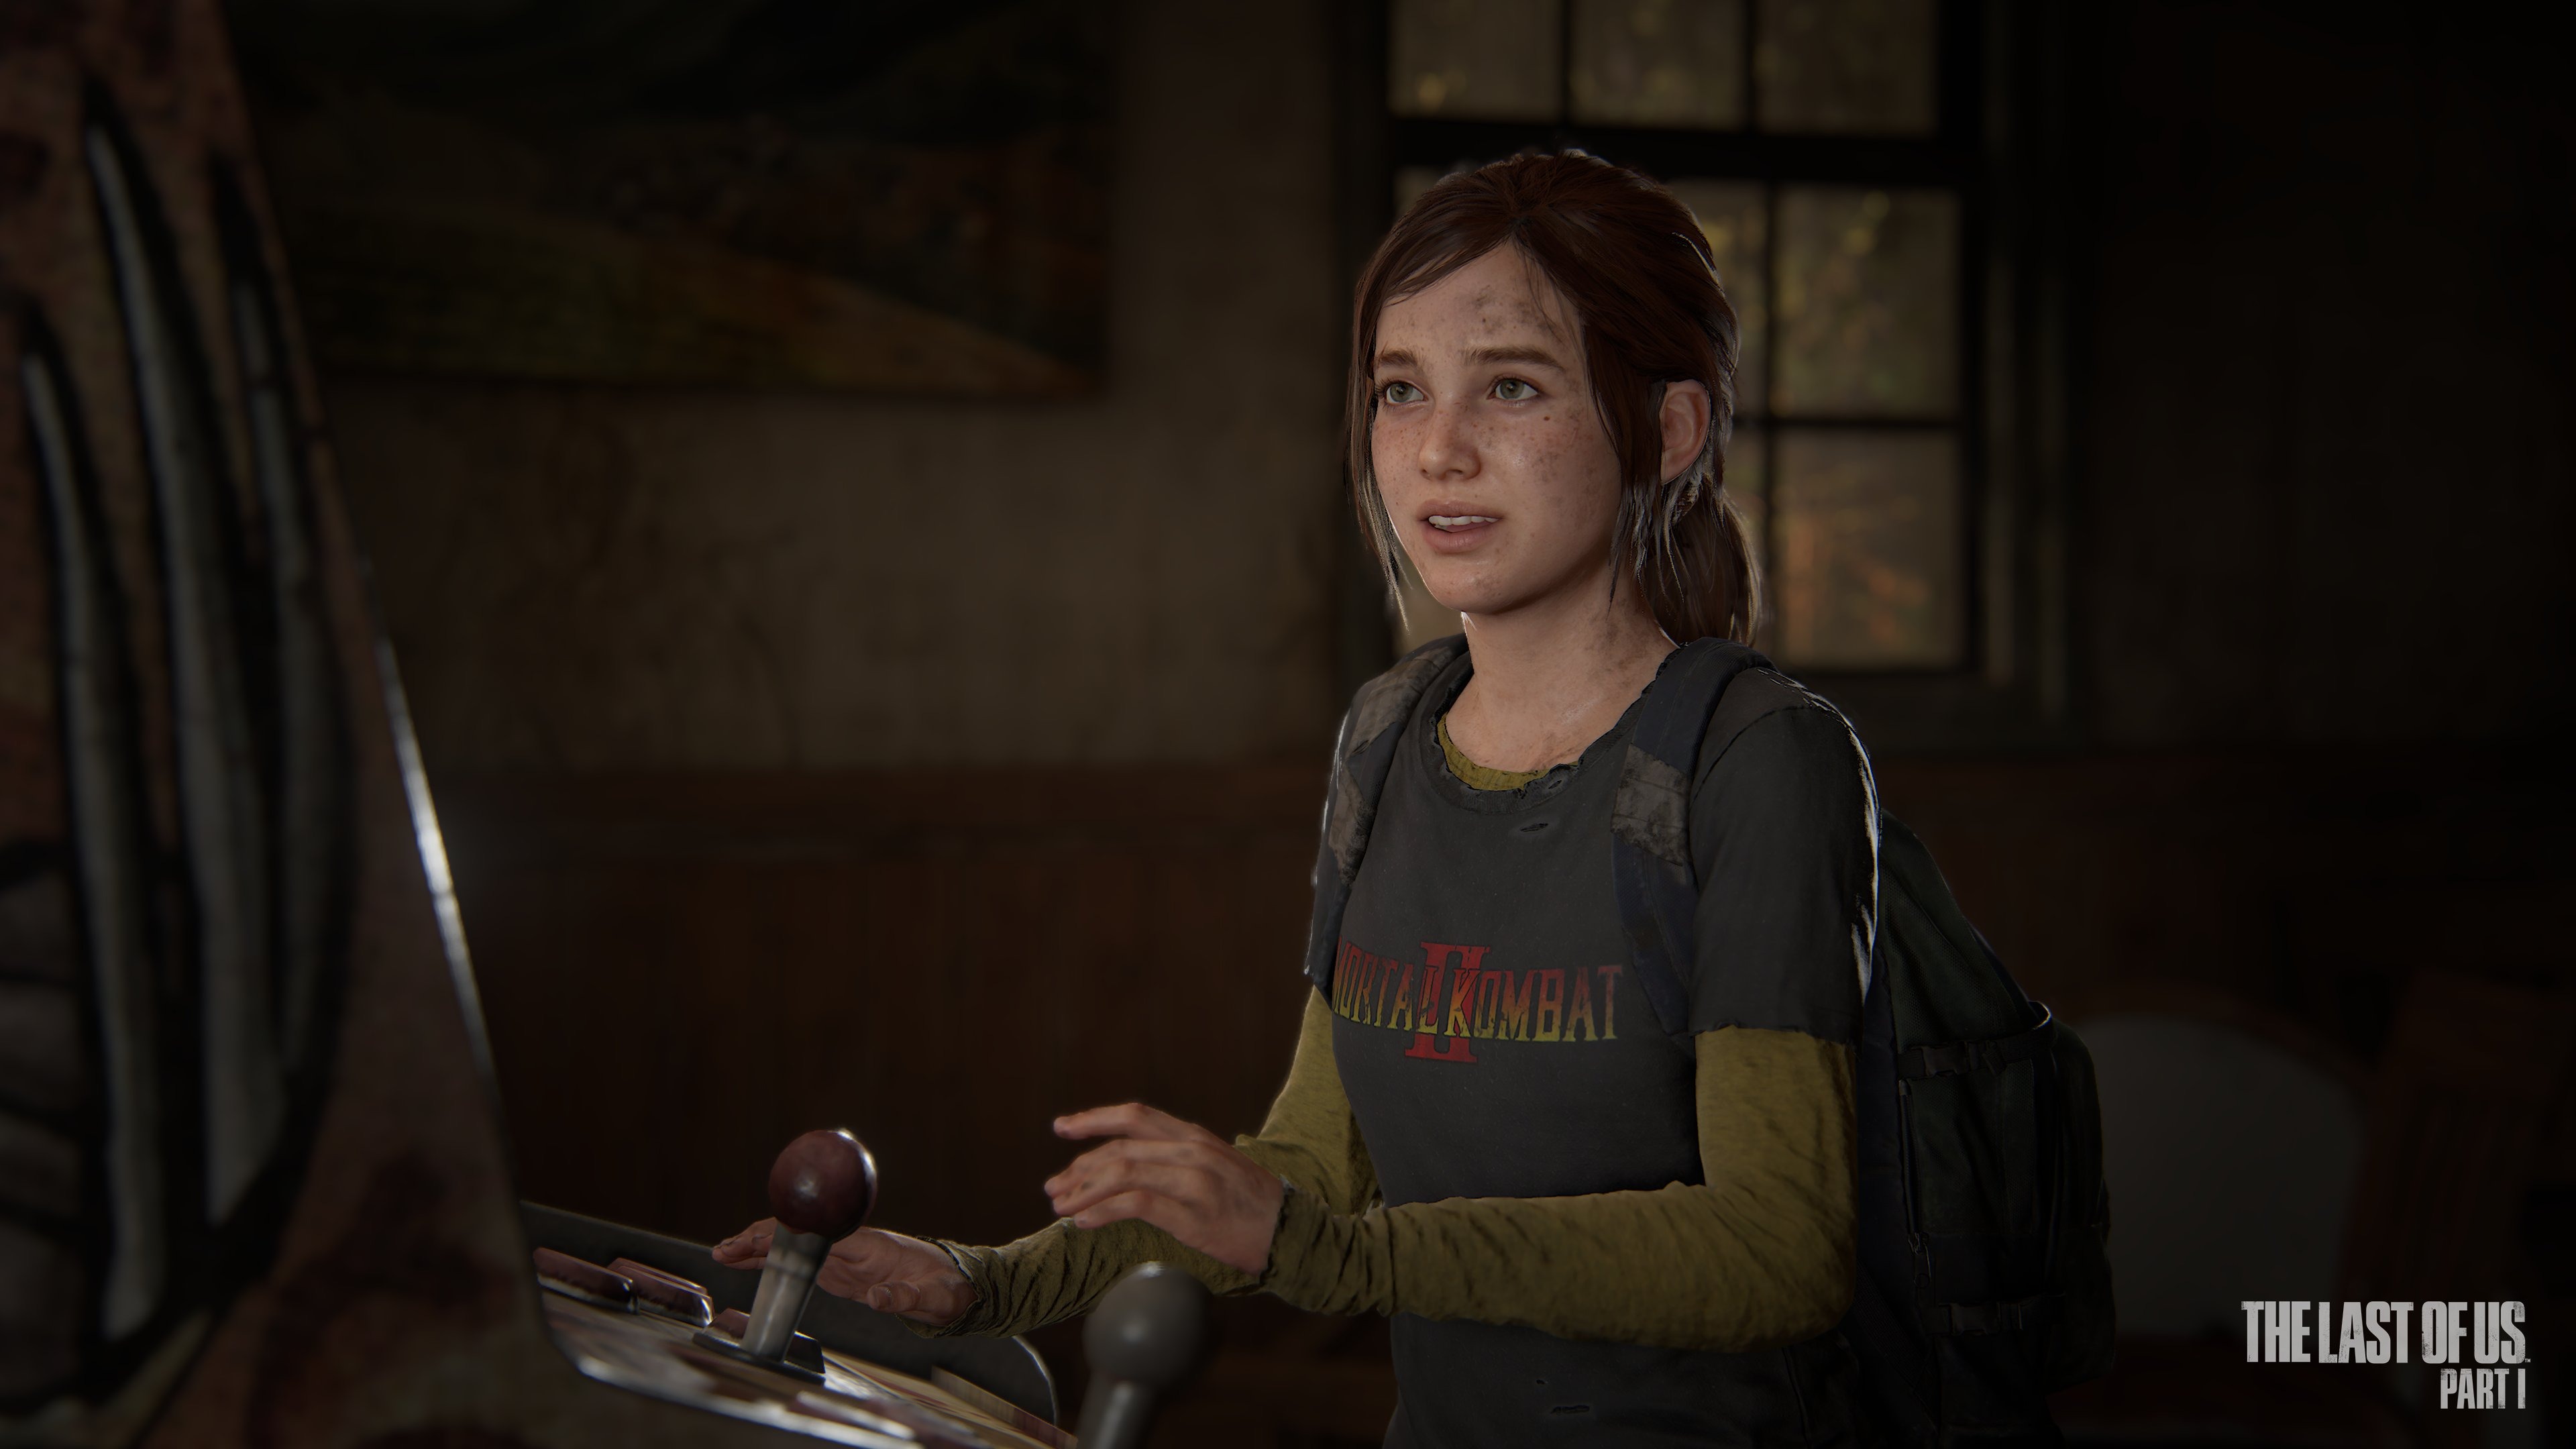 The Last of Us Part 1 PS5 update adds those sweet HBO cosmetics